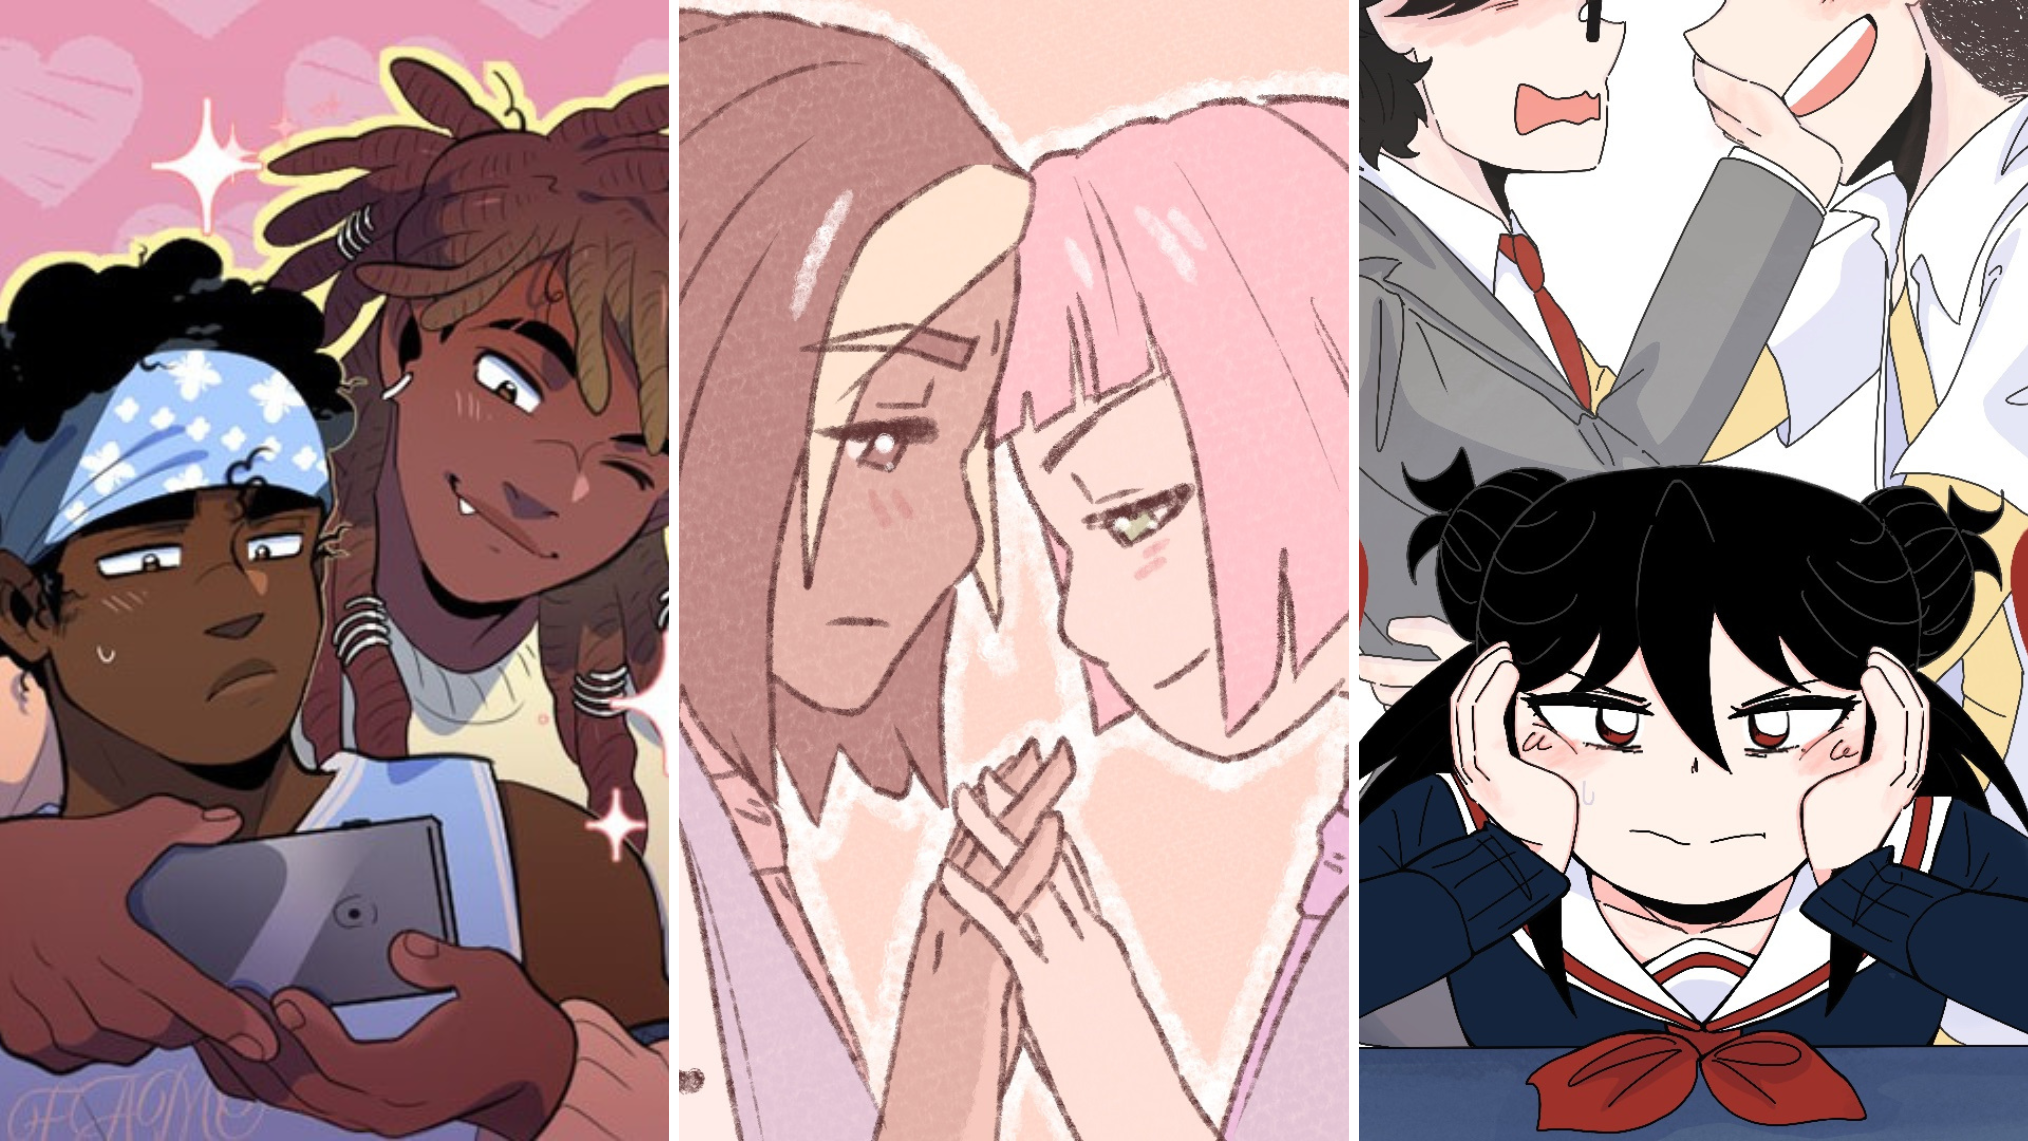 Queerly Not Straight: 7 LGBTQ+ Webtoons You Should Read in 2023 post that includes images by Daybreak by Moosopp, It's Okay to Like Girls by Jehded Waffles and My Brother's (Not So) Secret Boyfriend by metaromantic